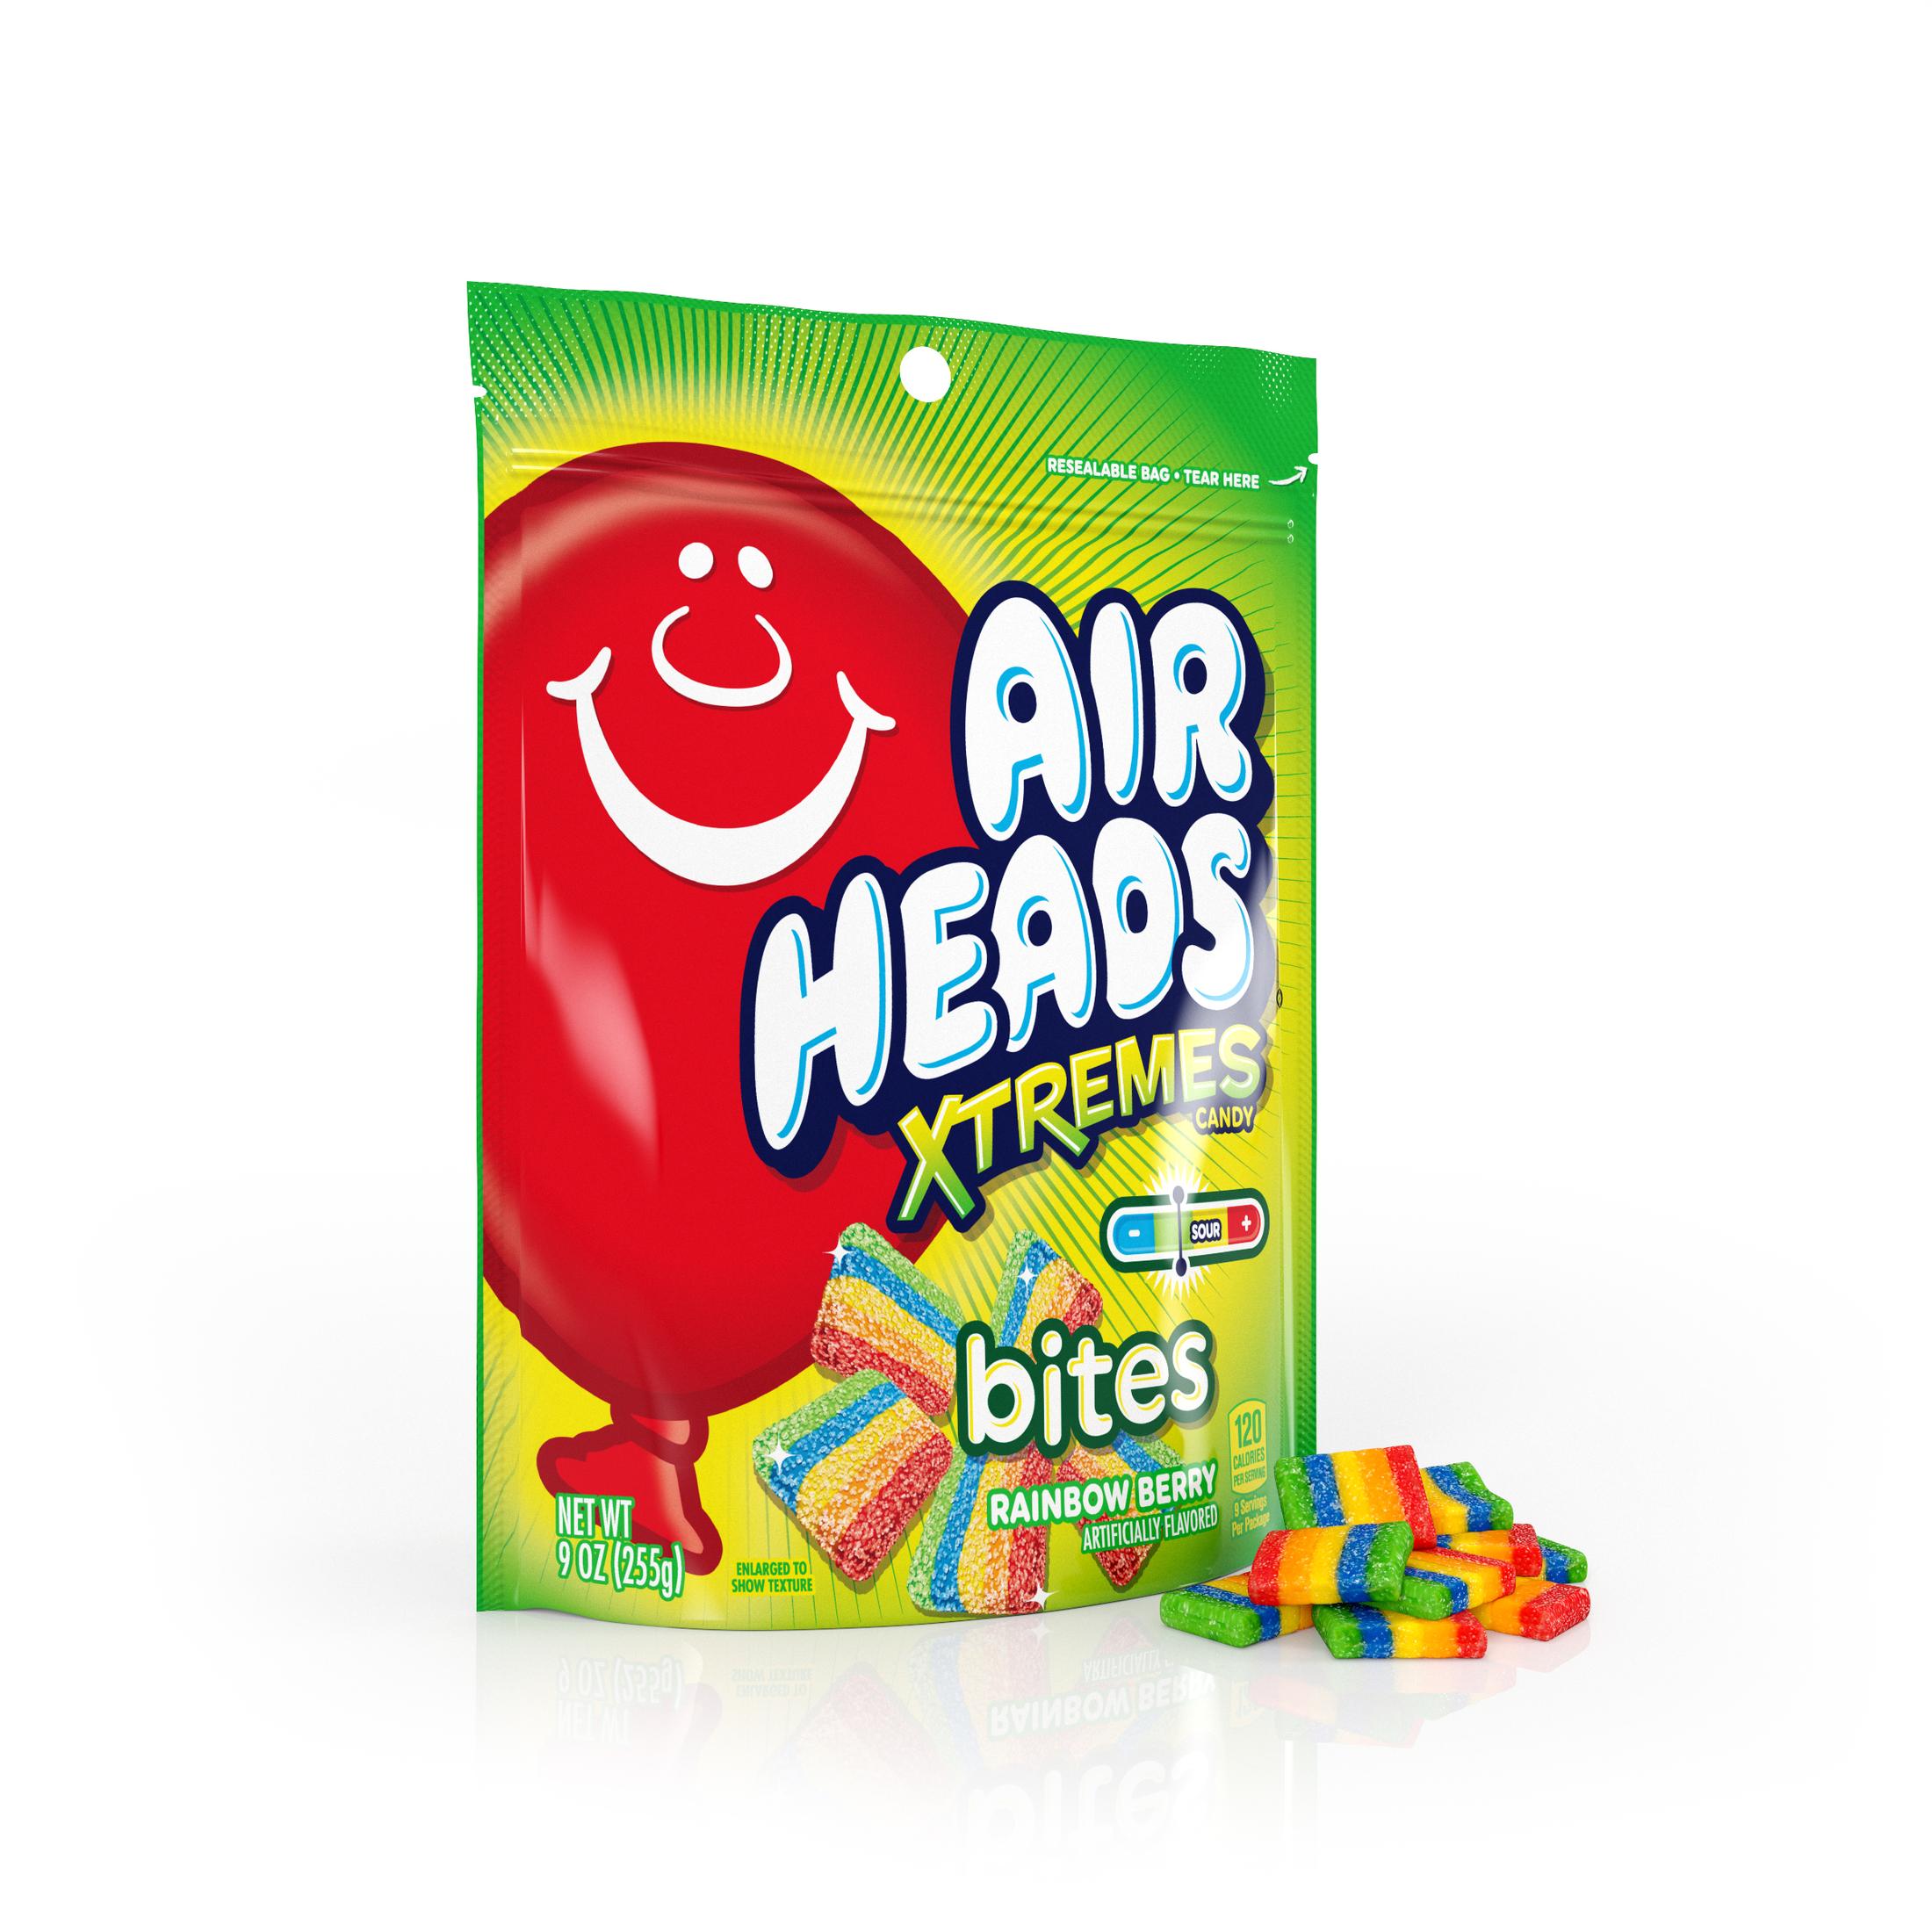 Airheads Xtremes Bites Sweetly Sour Candy, Rainbow Berry, 9 oz - image 1 of 6